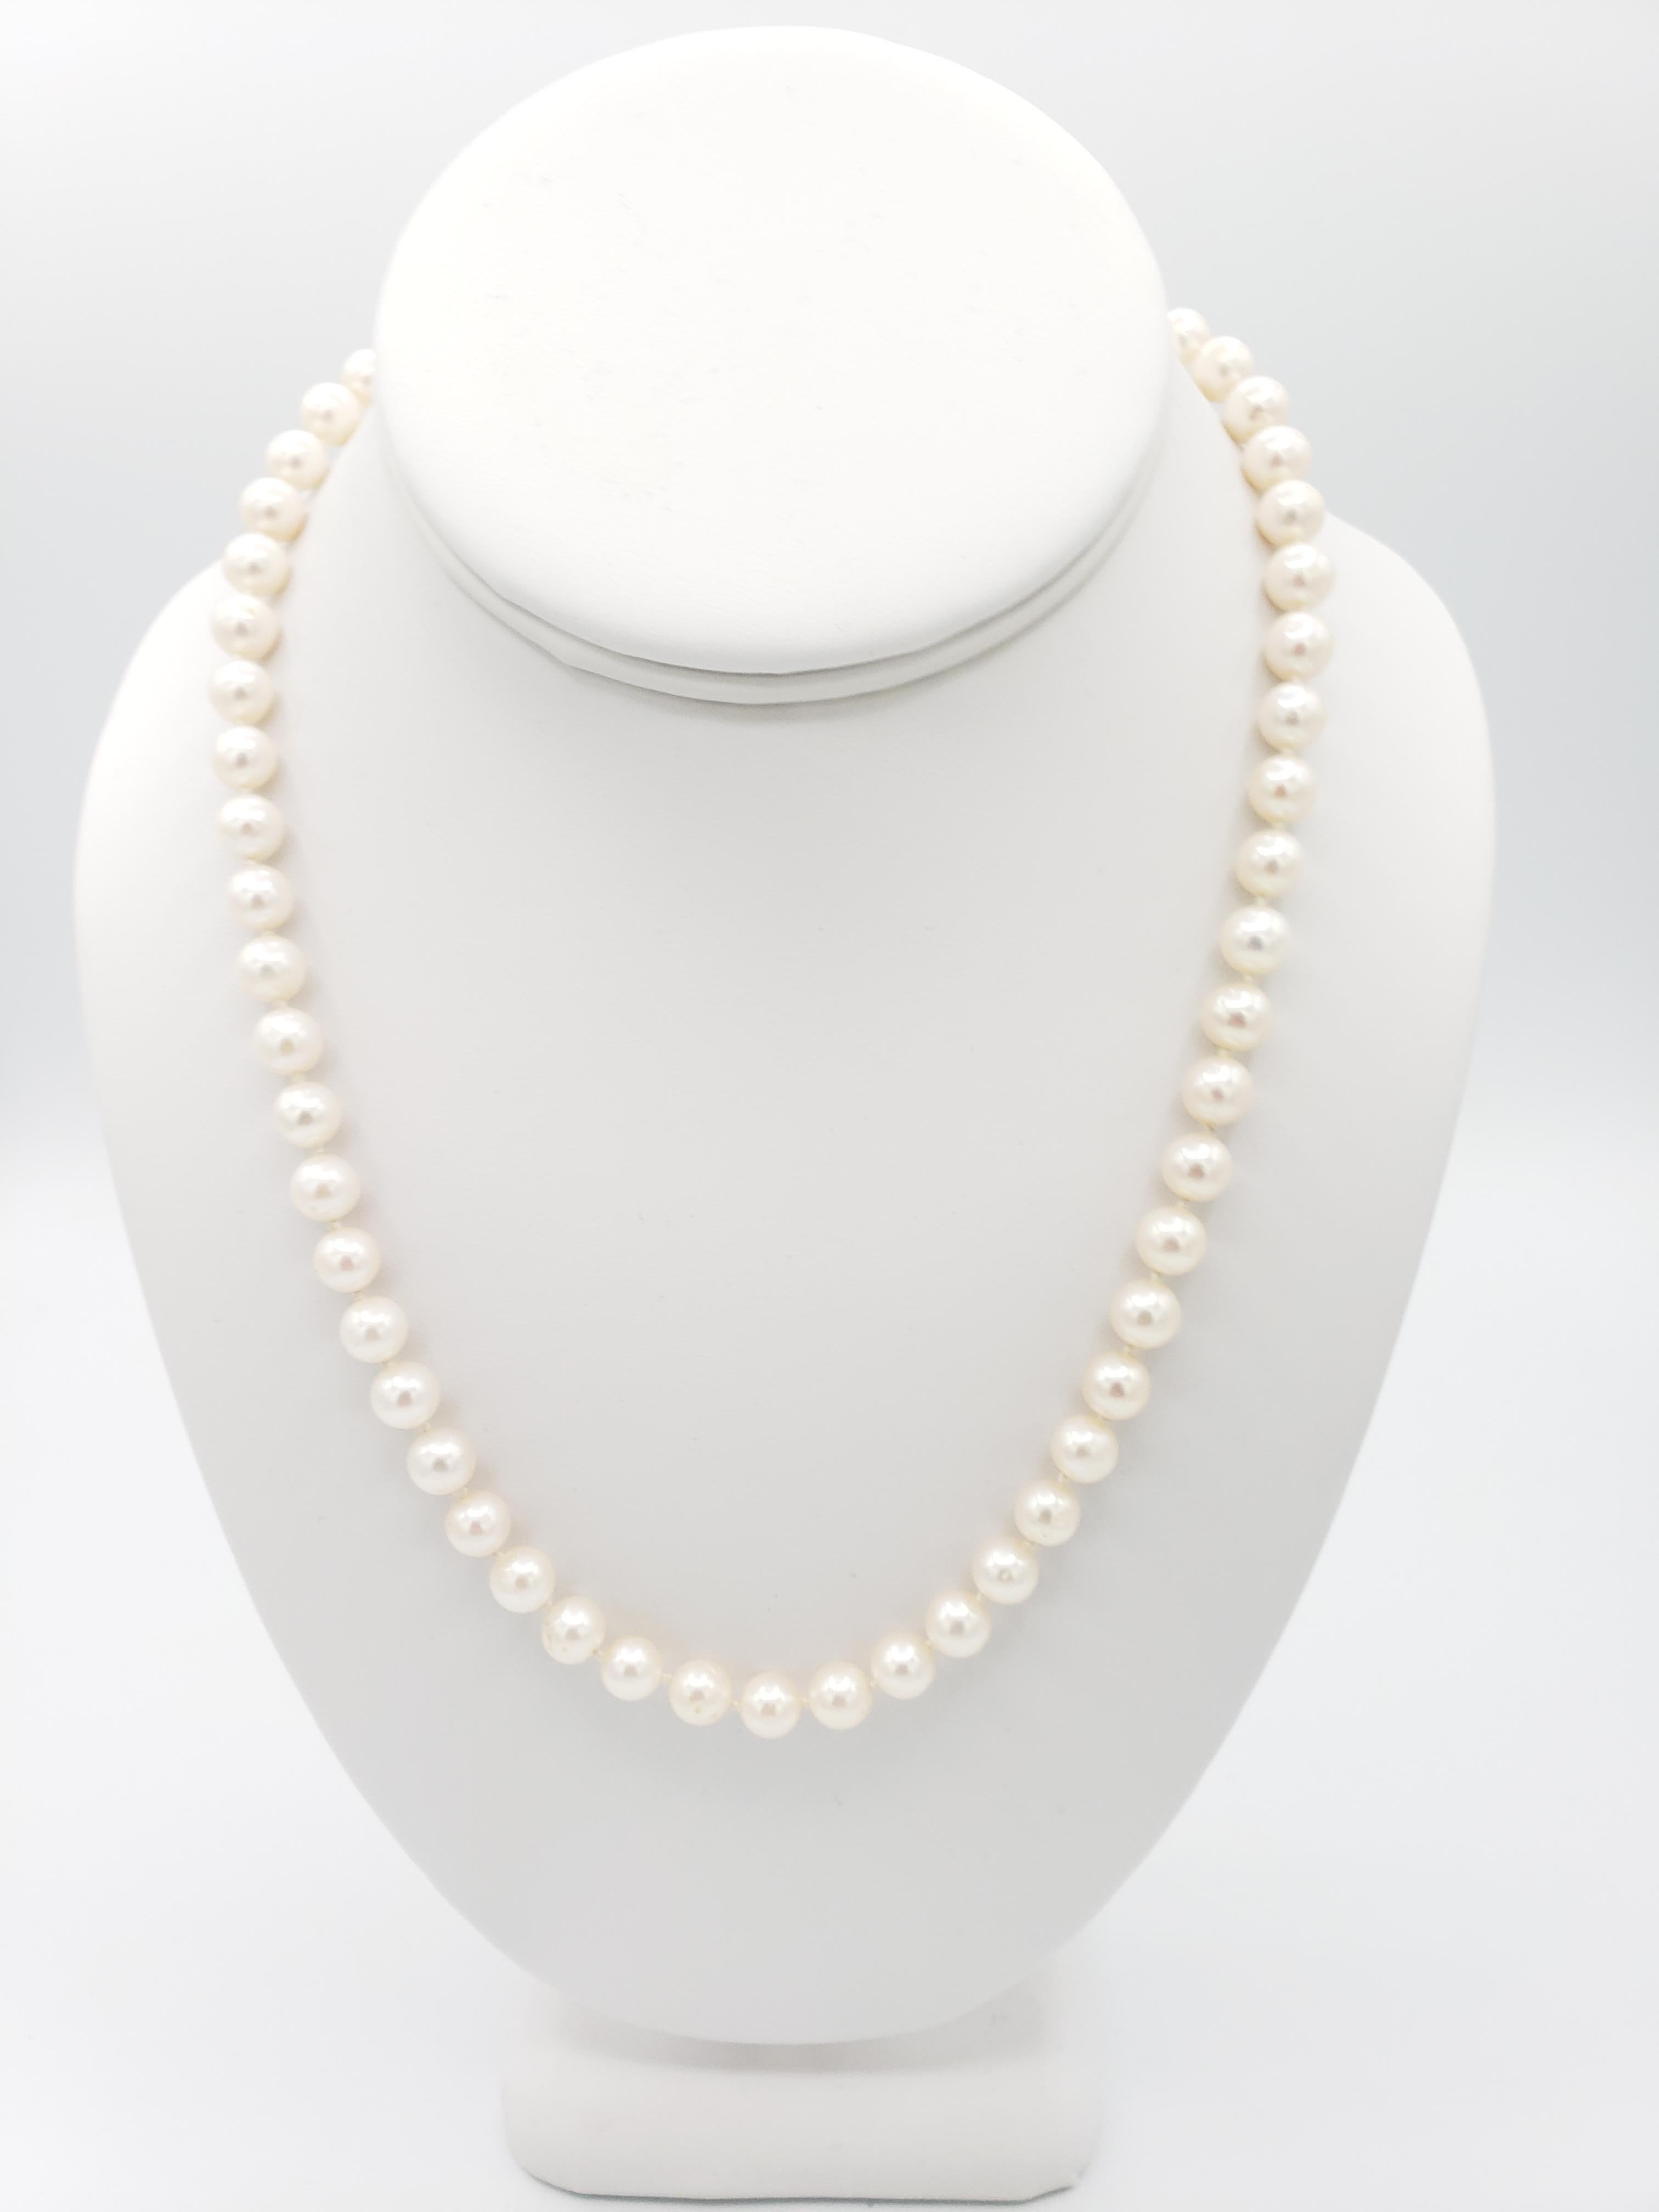 Indulge in elegance with this exquisite brand new necklace from LaFrancee. Crafted from 14K solid white gold, this string style necklace boasts a certified AA+ quality Japanese Akoya salt water white pearl as its main stone. Measuring at 17 inches